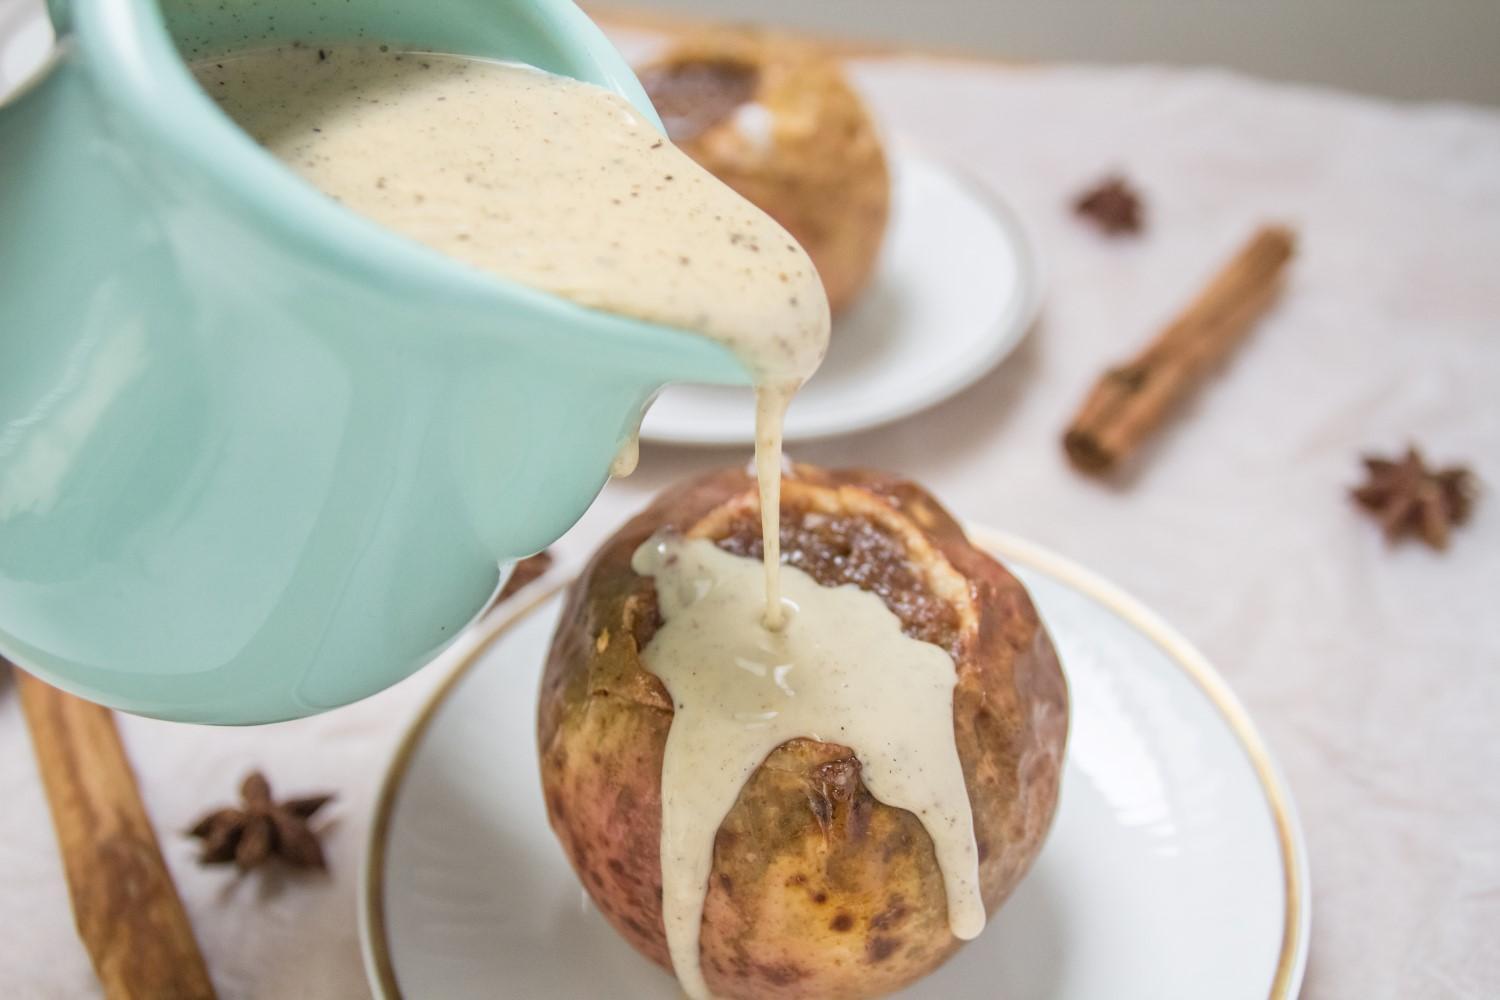 Use Your Noodles - Hot Baked Apples with Vanilla Sauce